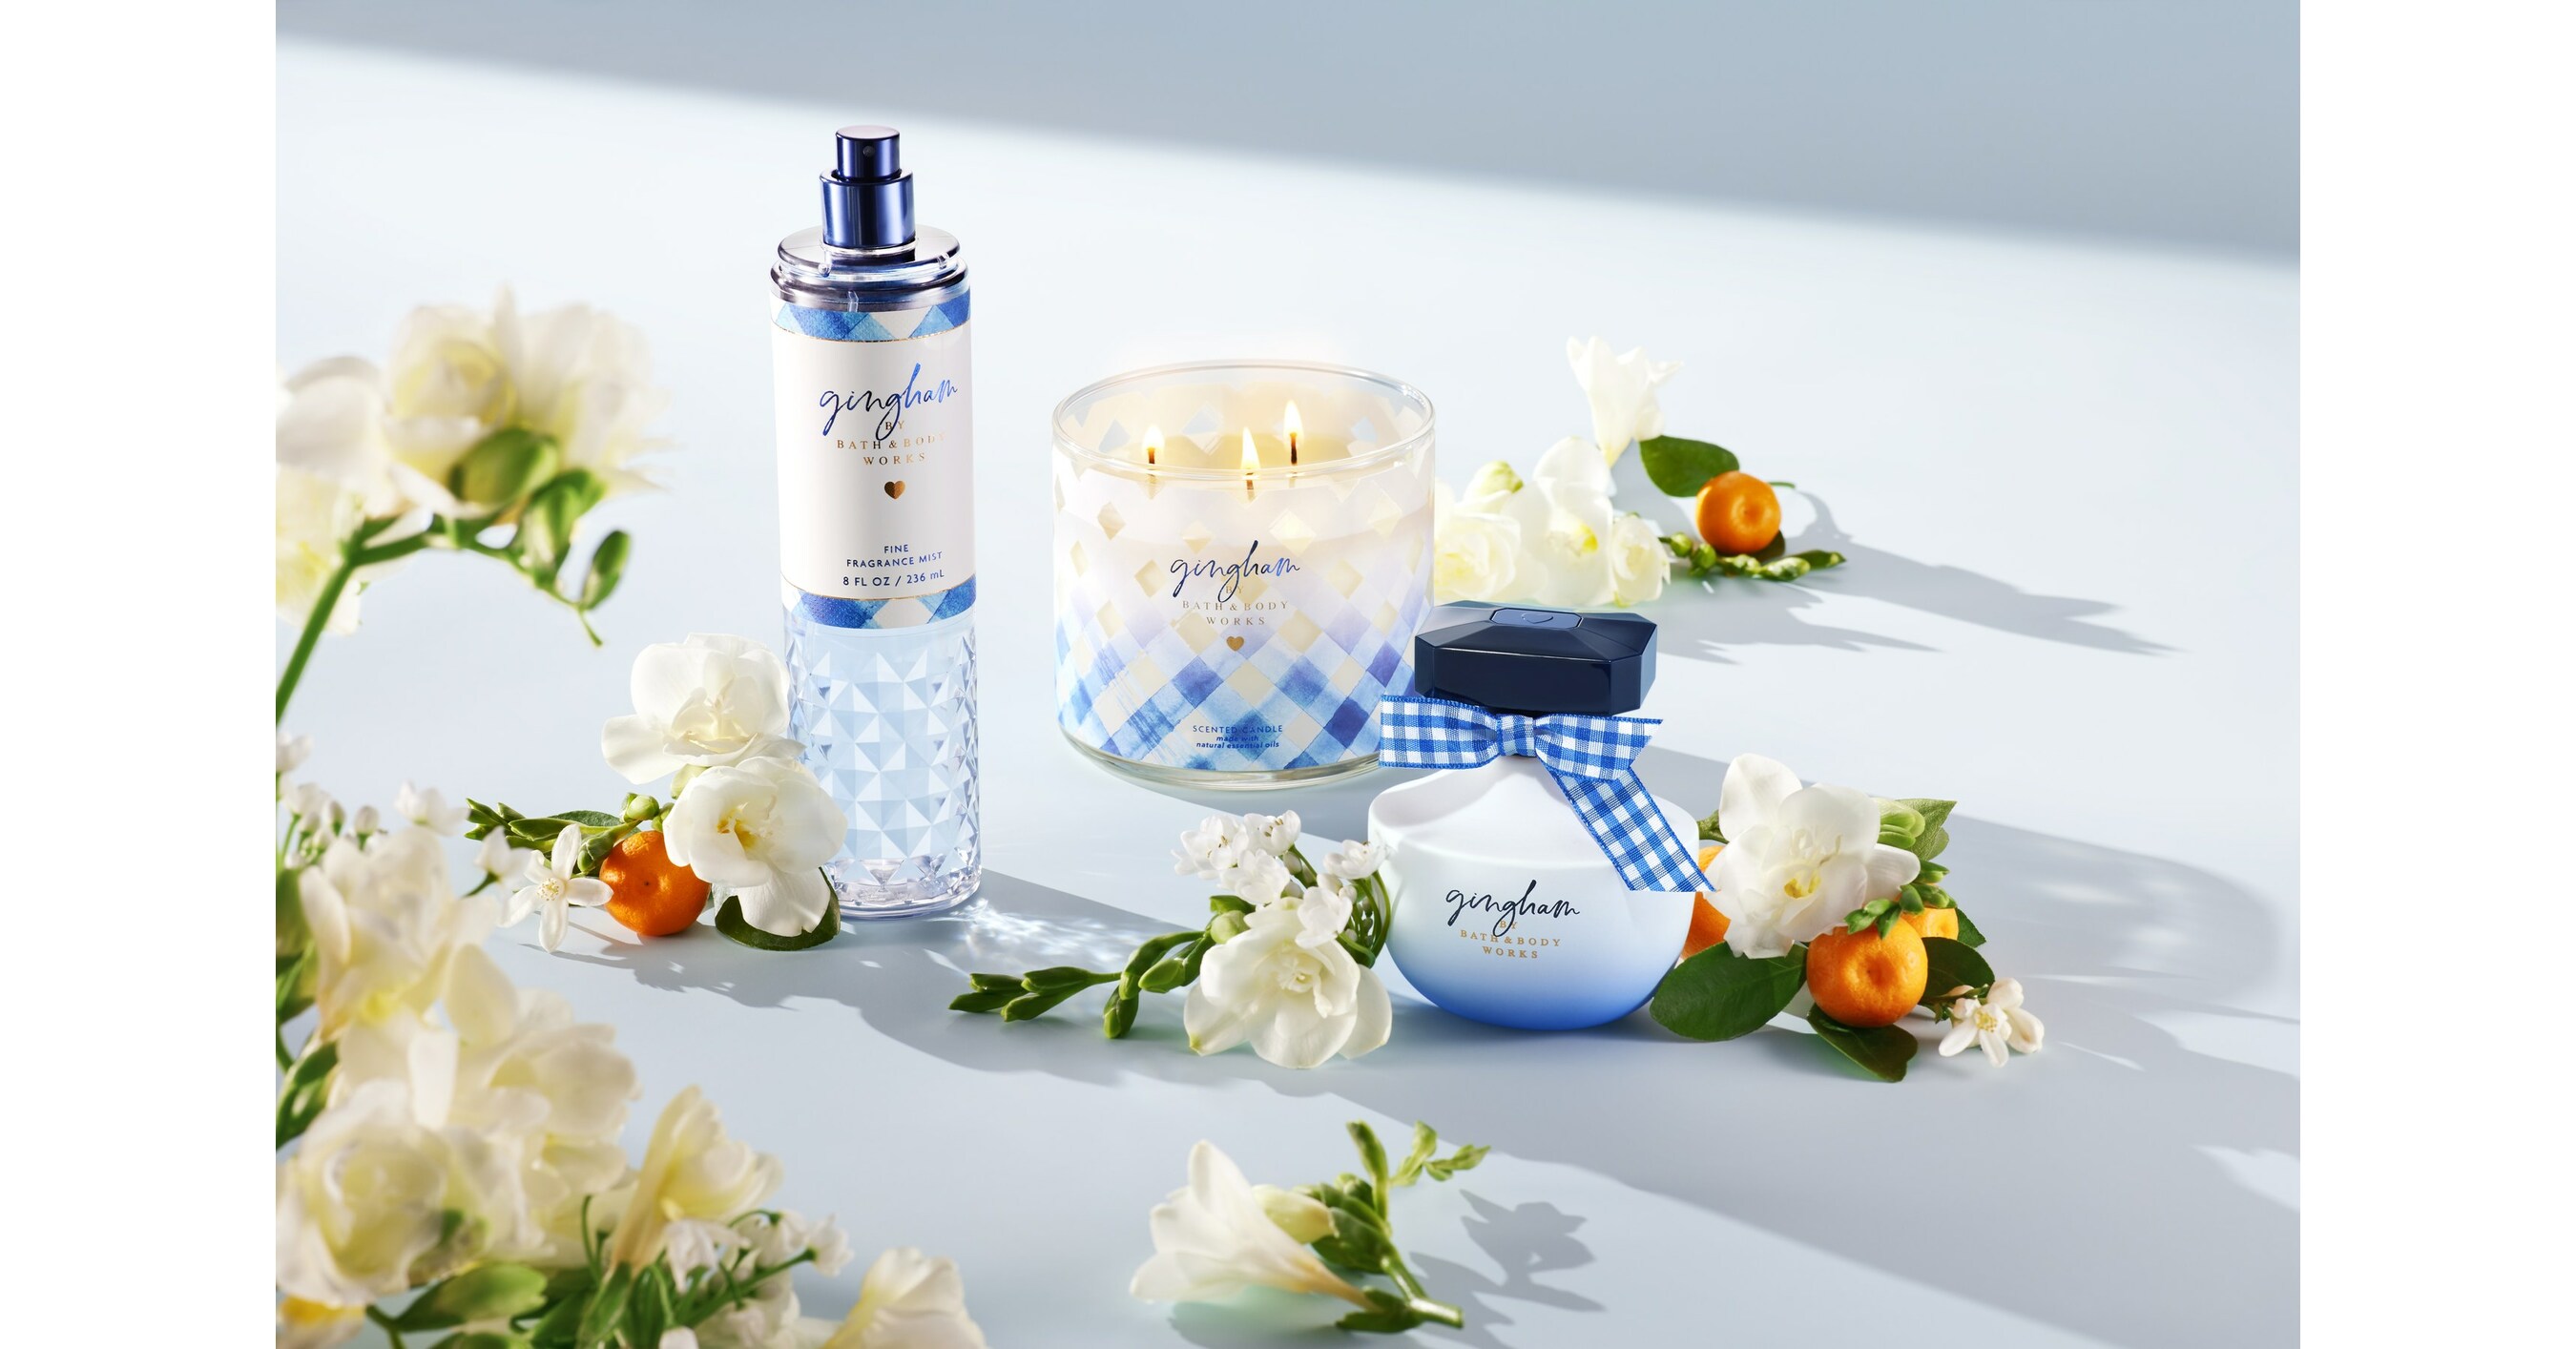 BATH & BODY WORKS ANNOUNCES LEGACY-INSPIRED LAUNCHES IN